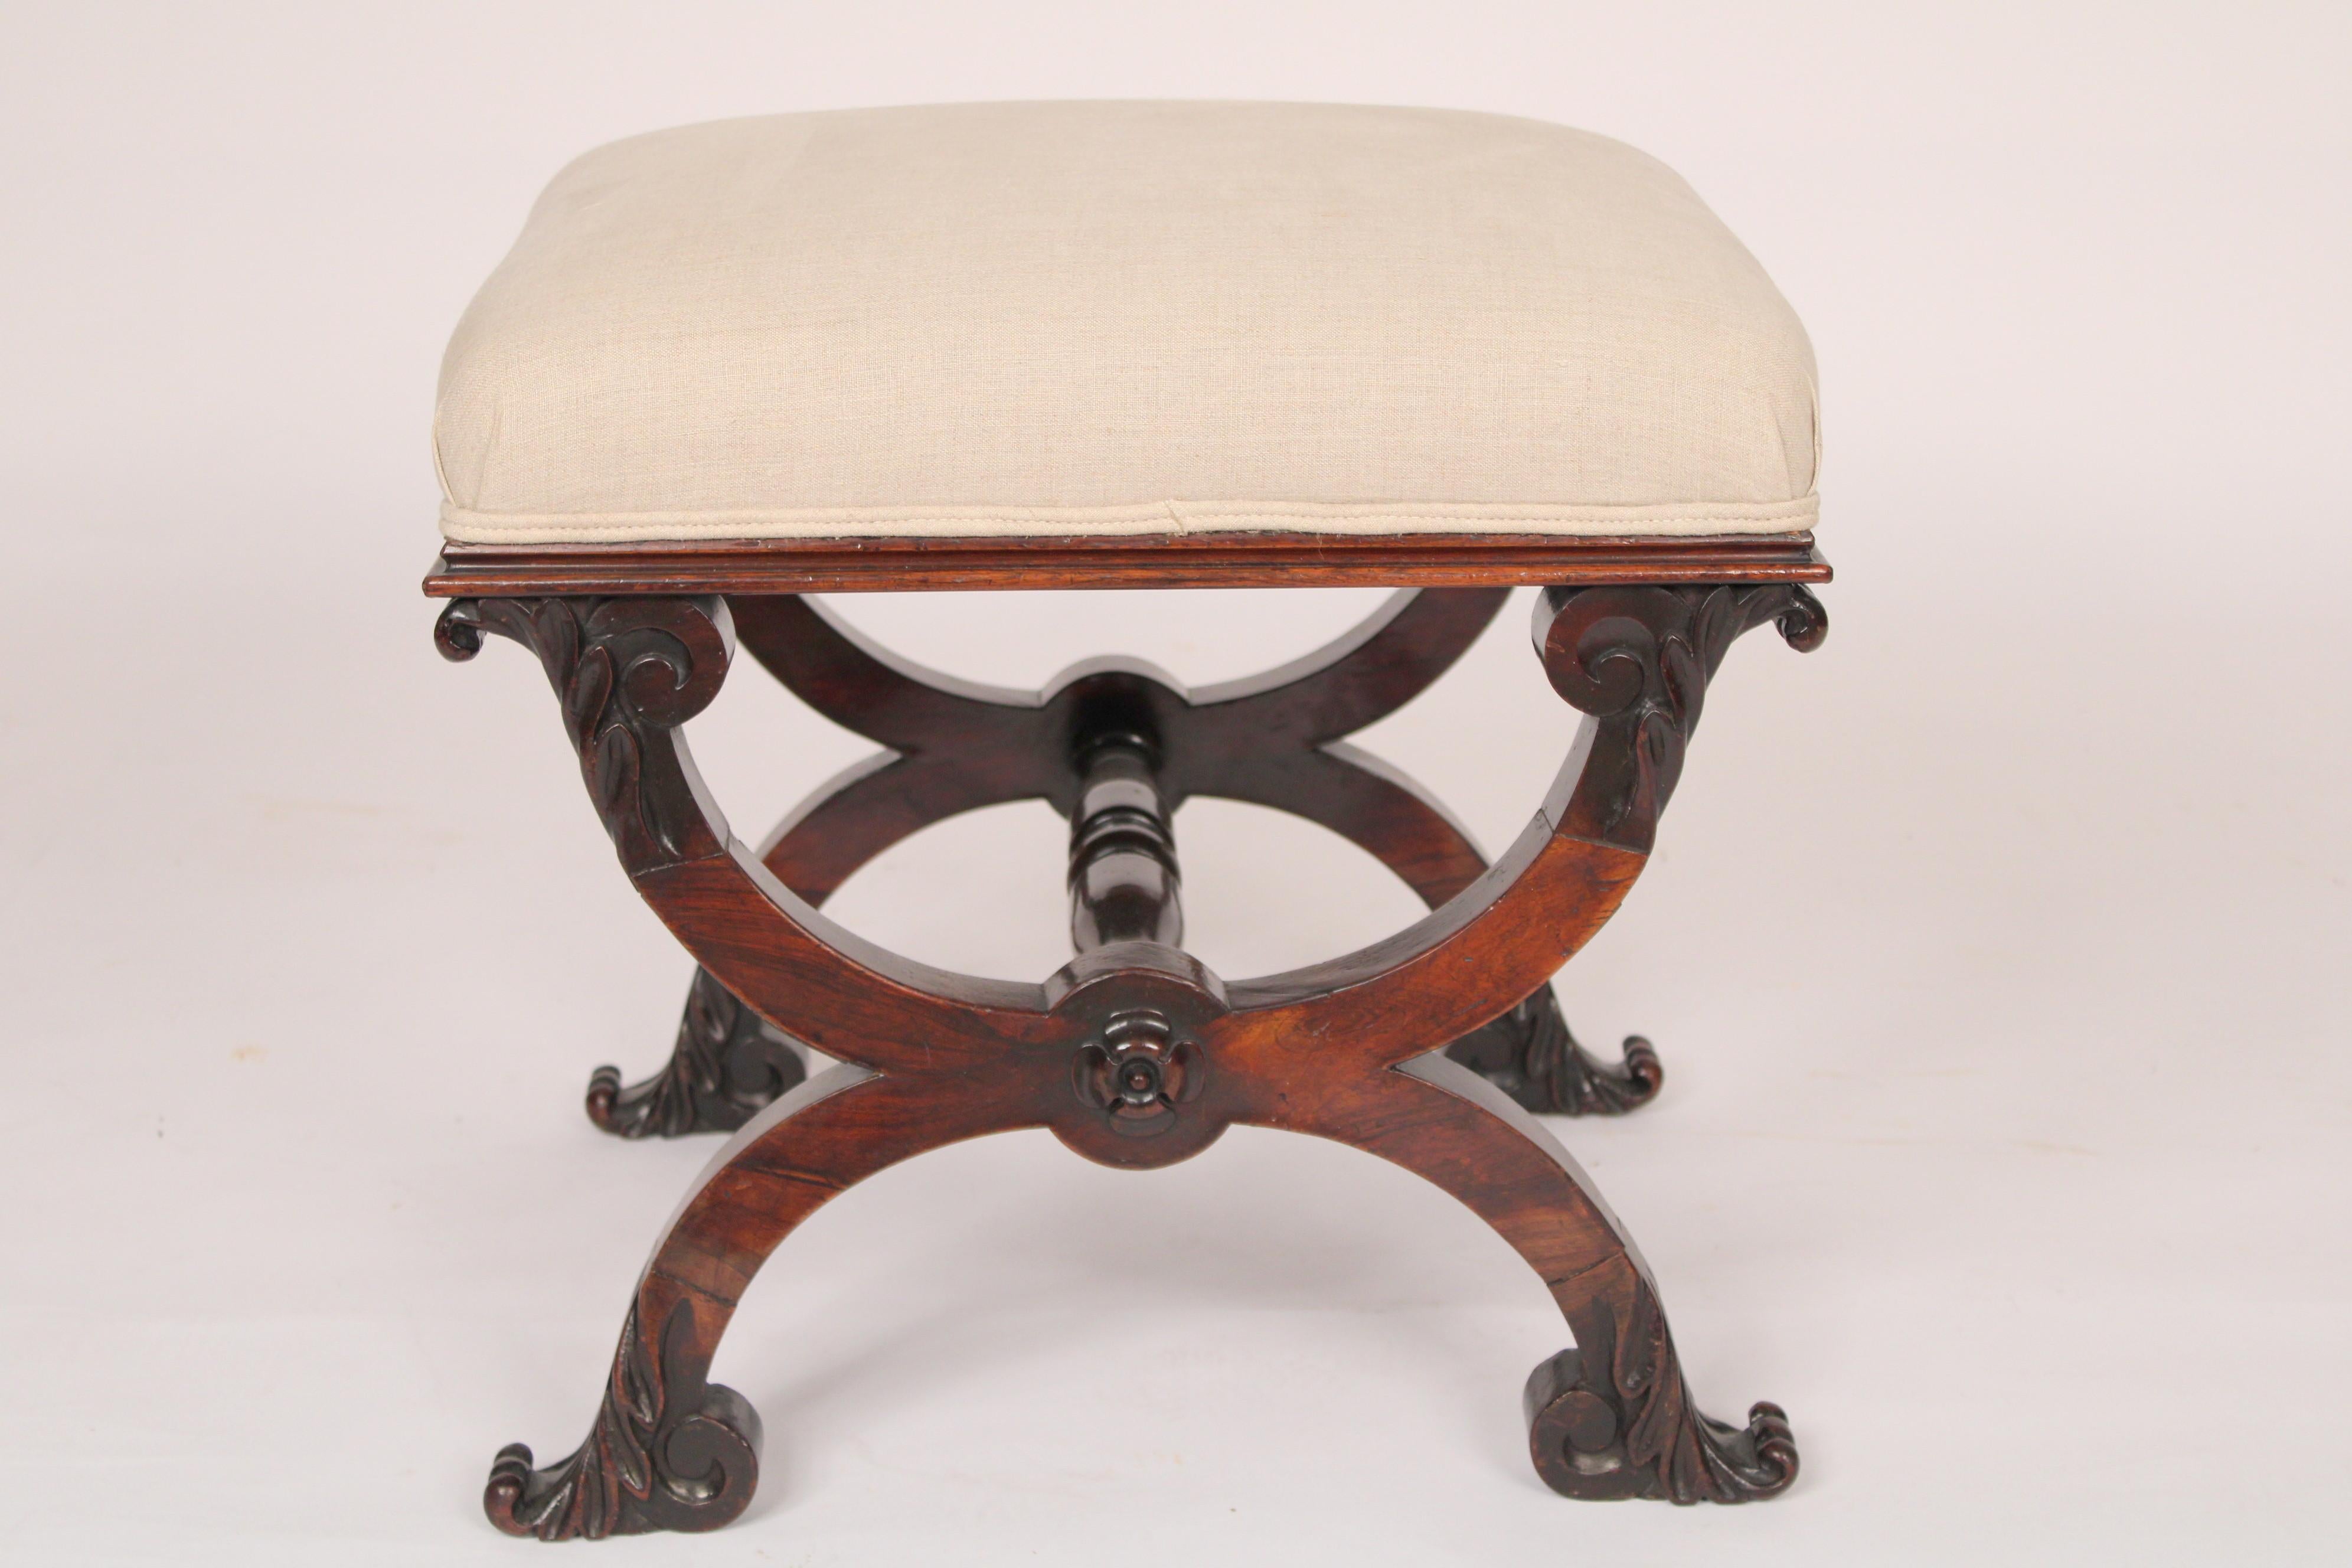 William IV curule form upholstered rose wood bench, circa 1835. With restorations. The feet have possibly been added.